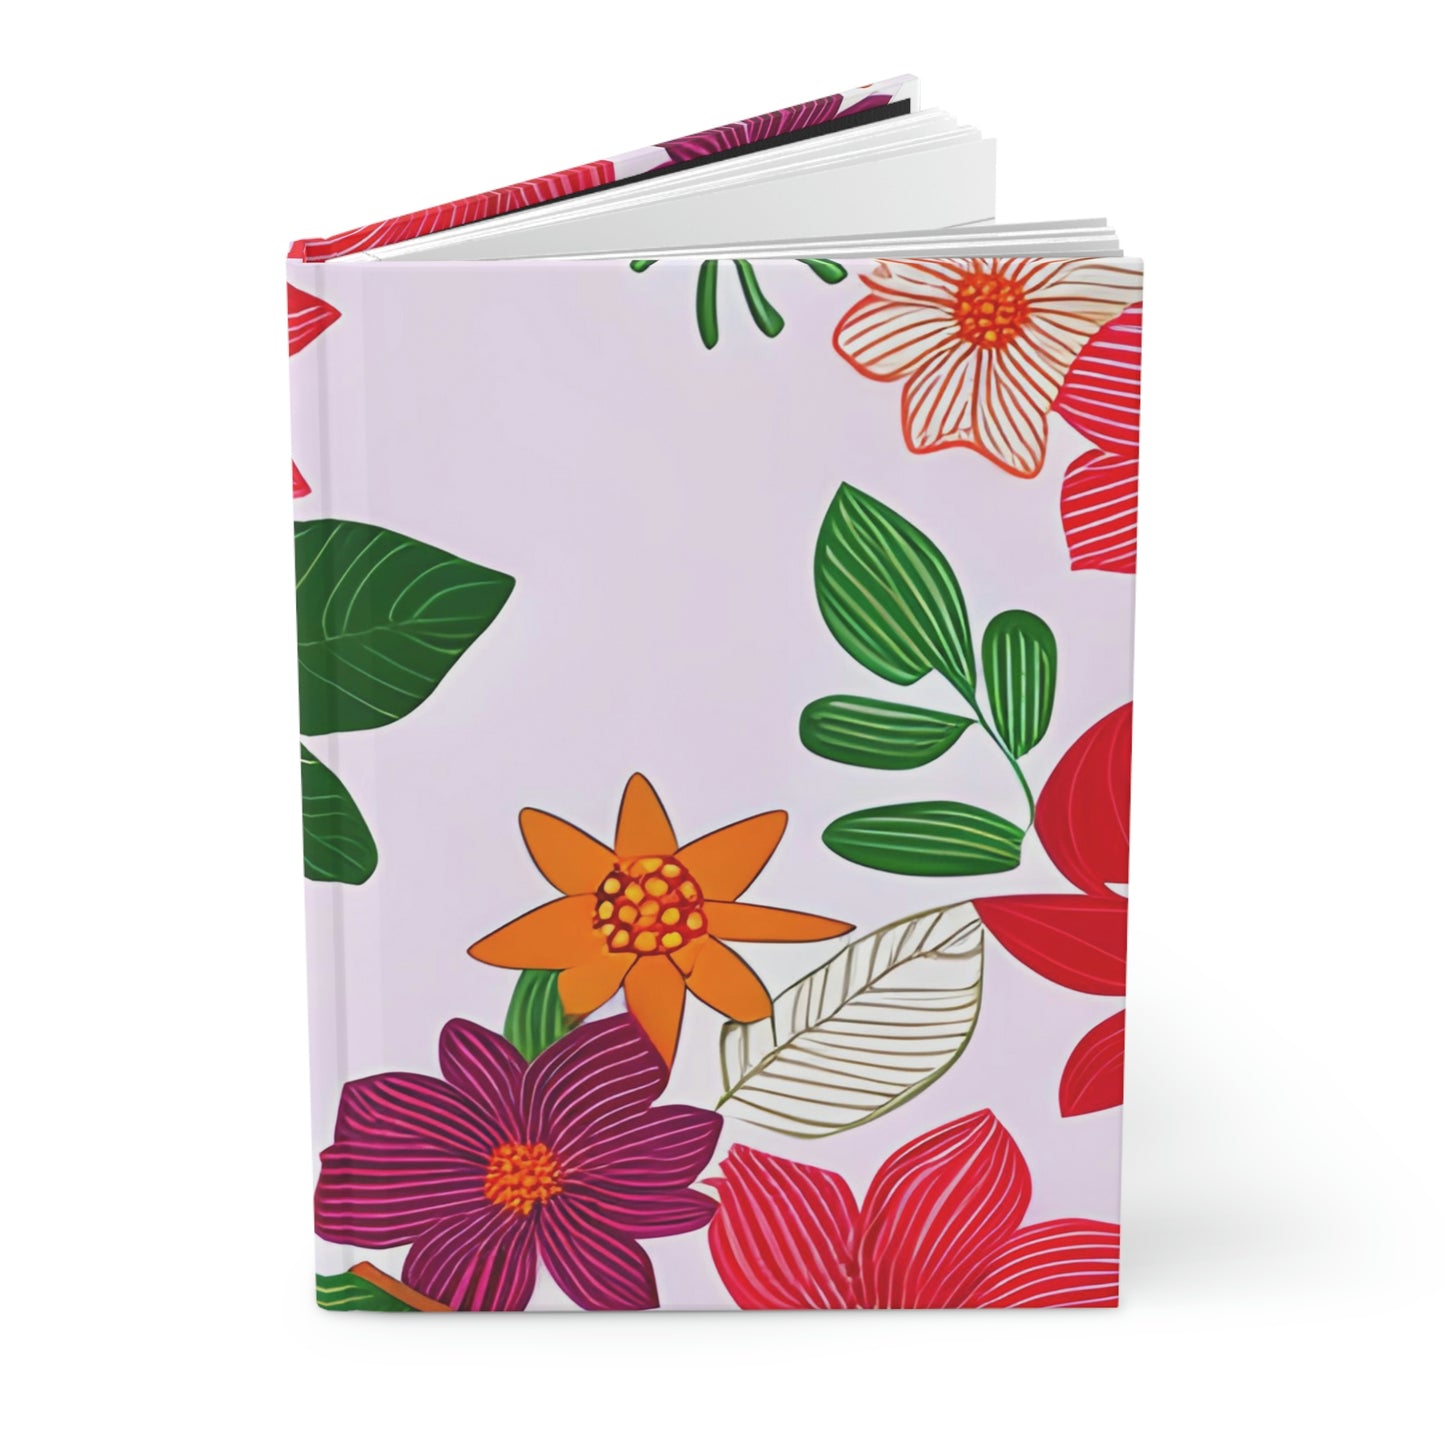 "Multi-Colored Flowers" Hardcover Journal - Weave Got Gifts - Unique Gifts You Won’t Find Anywhere Else!